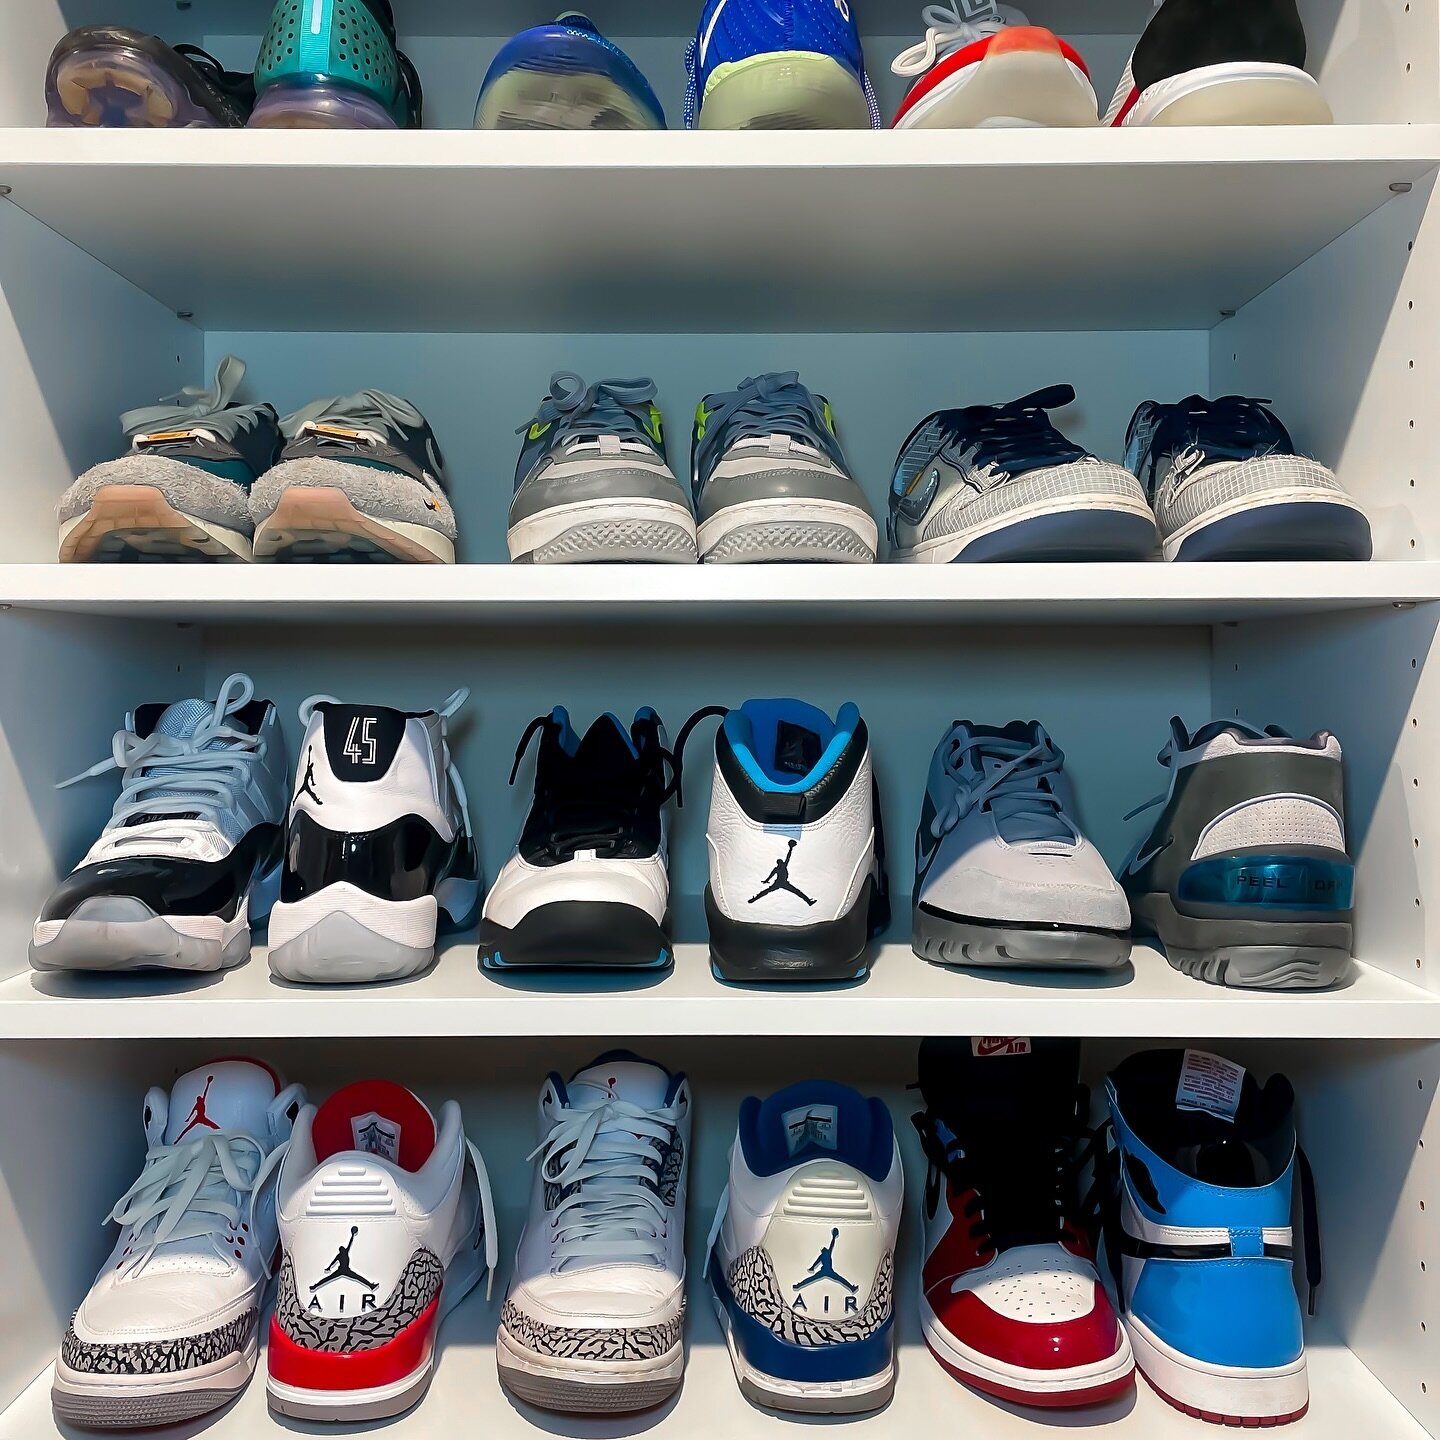 It&rsquo;s Game Day 🏈

Are you rooting for the 49ers or the Chiefs or Taylor Swift? 

#sortandstore #homeorganization #shoes #nikes #jordans #organizedshoes #shoeorganization #showcollection #offwhite #nikeshoes #shoecollector #sneakerhead #charlott